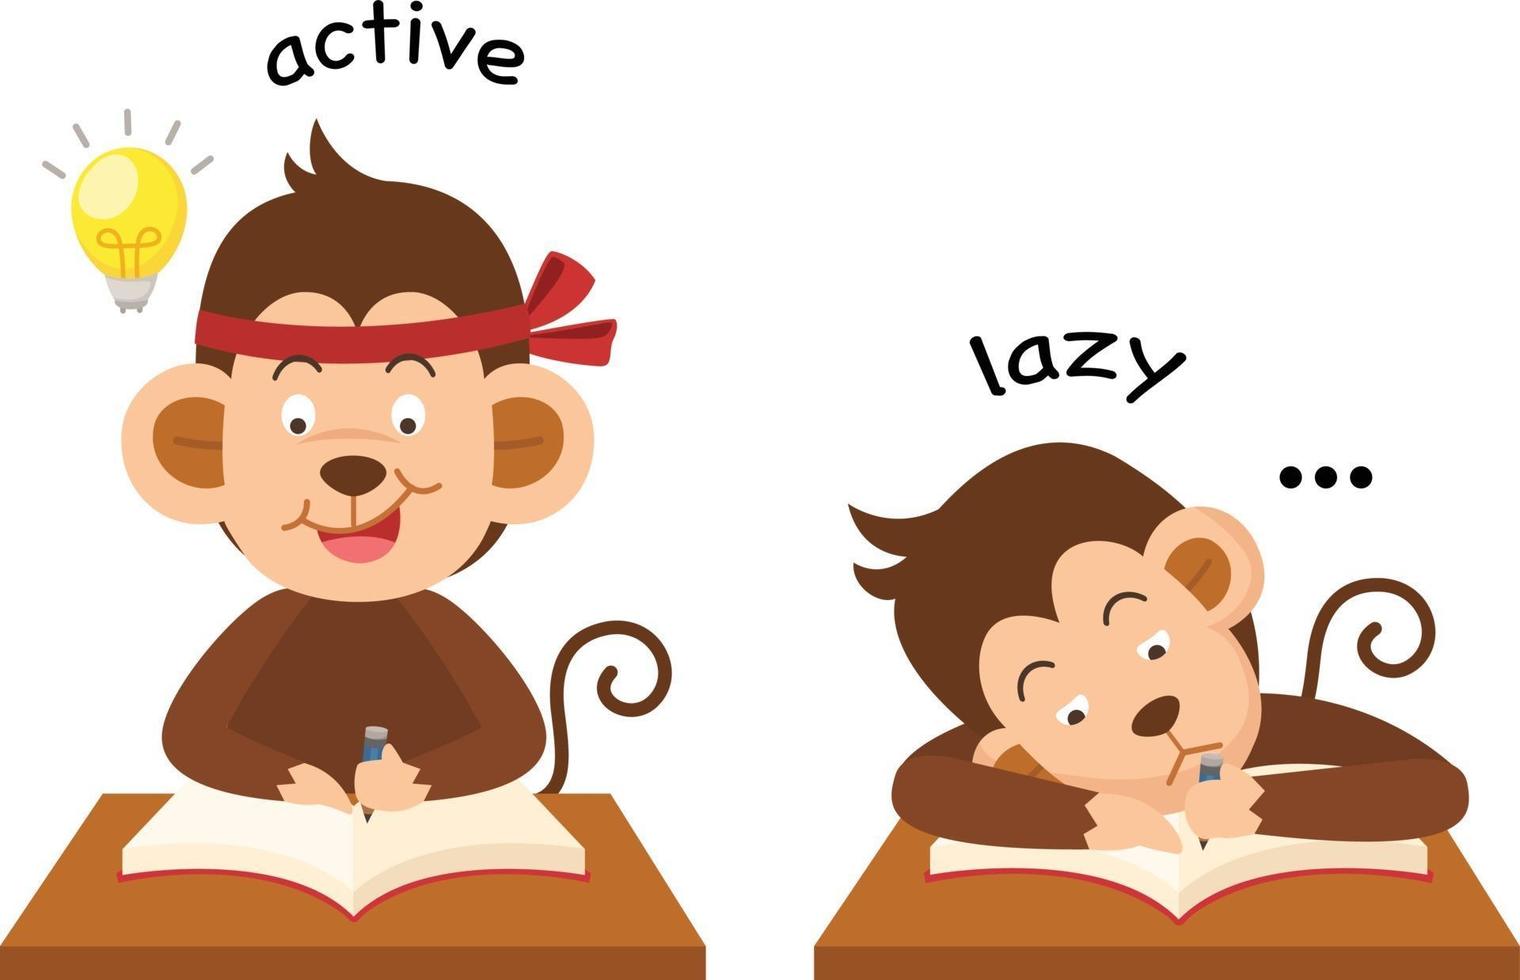 Opposite active and lazy illustration vector